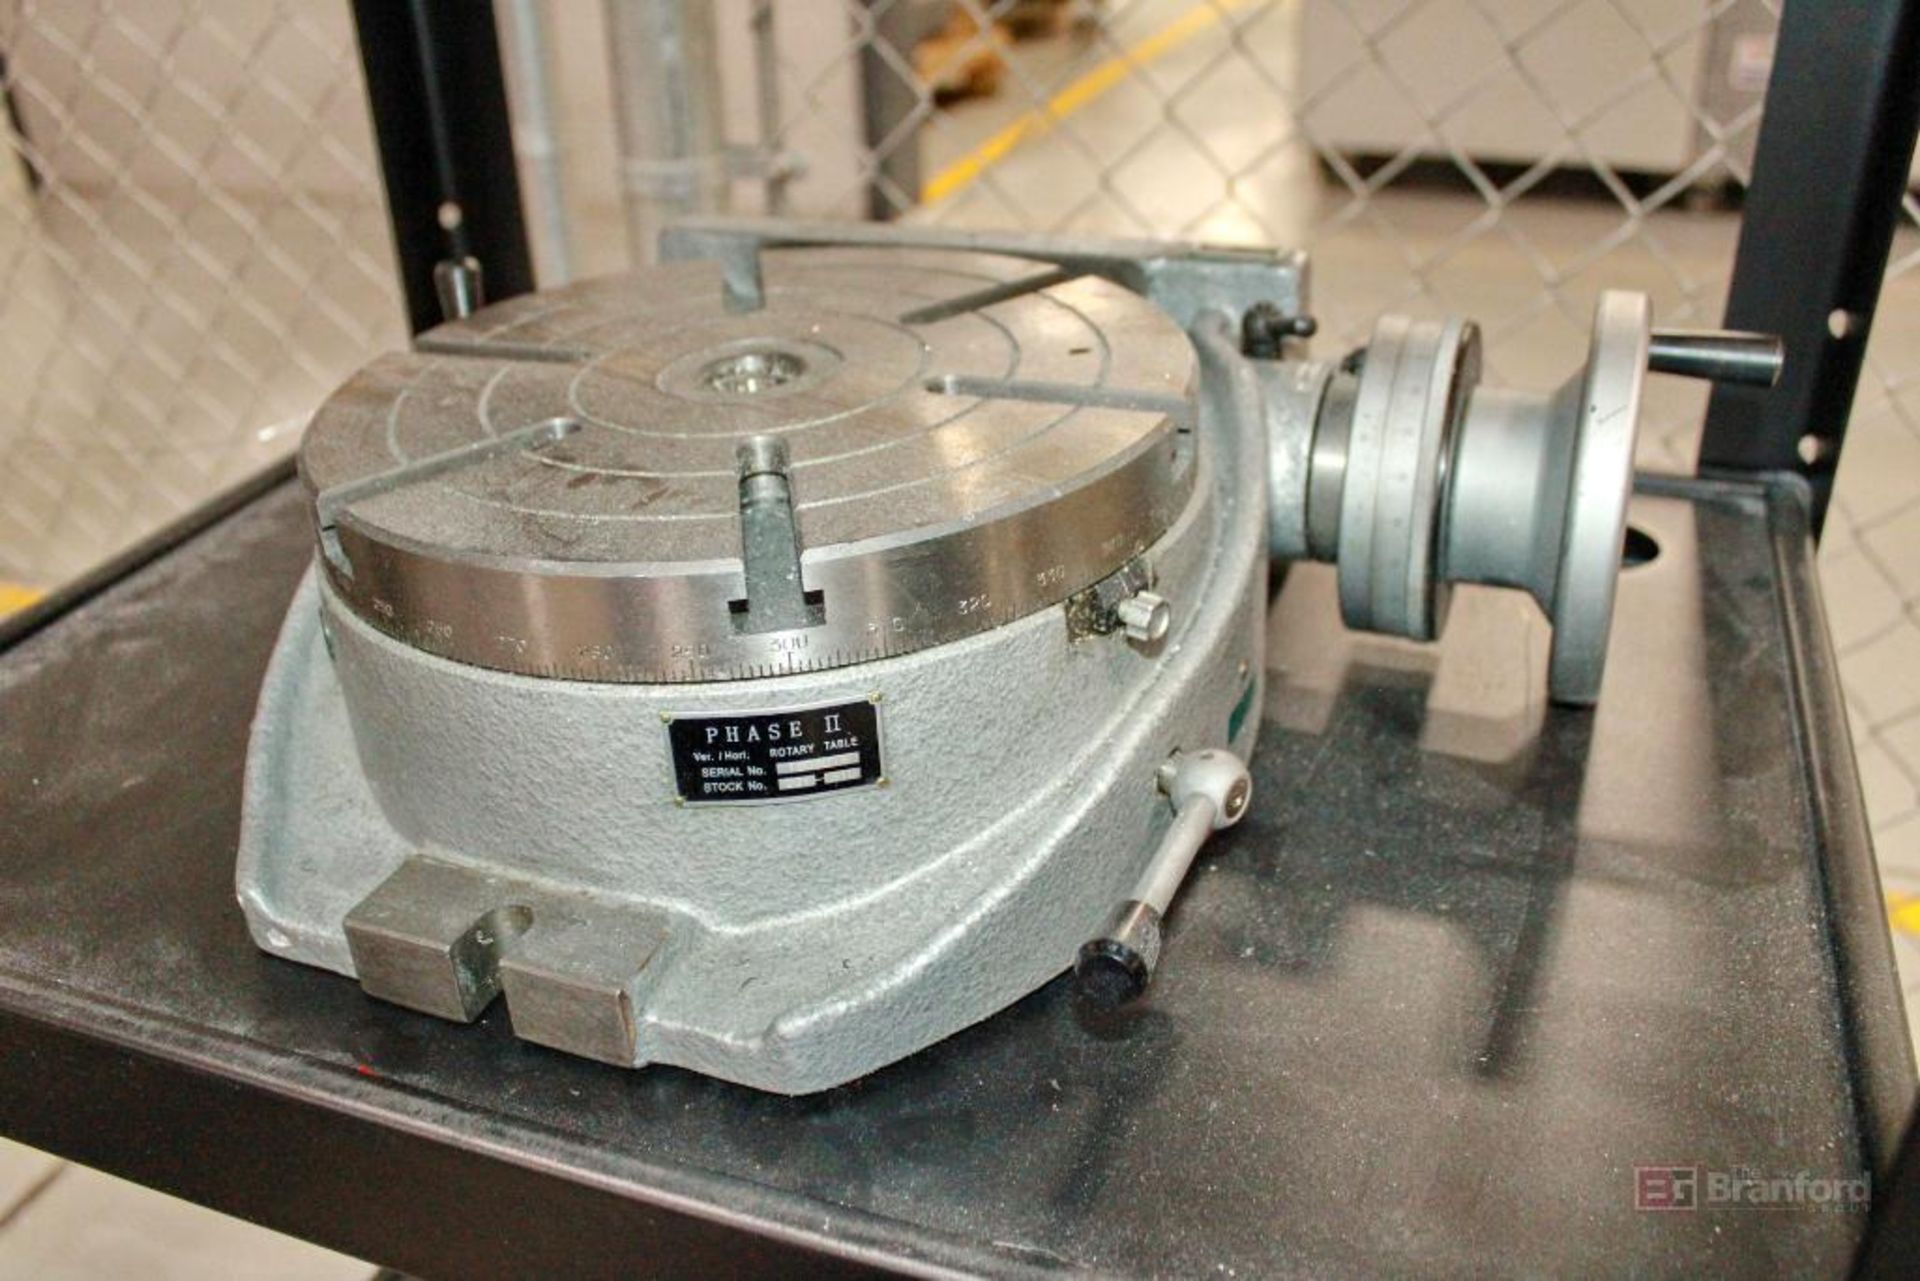 Phase-II 10" Rotary Table